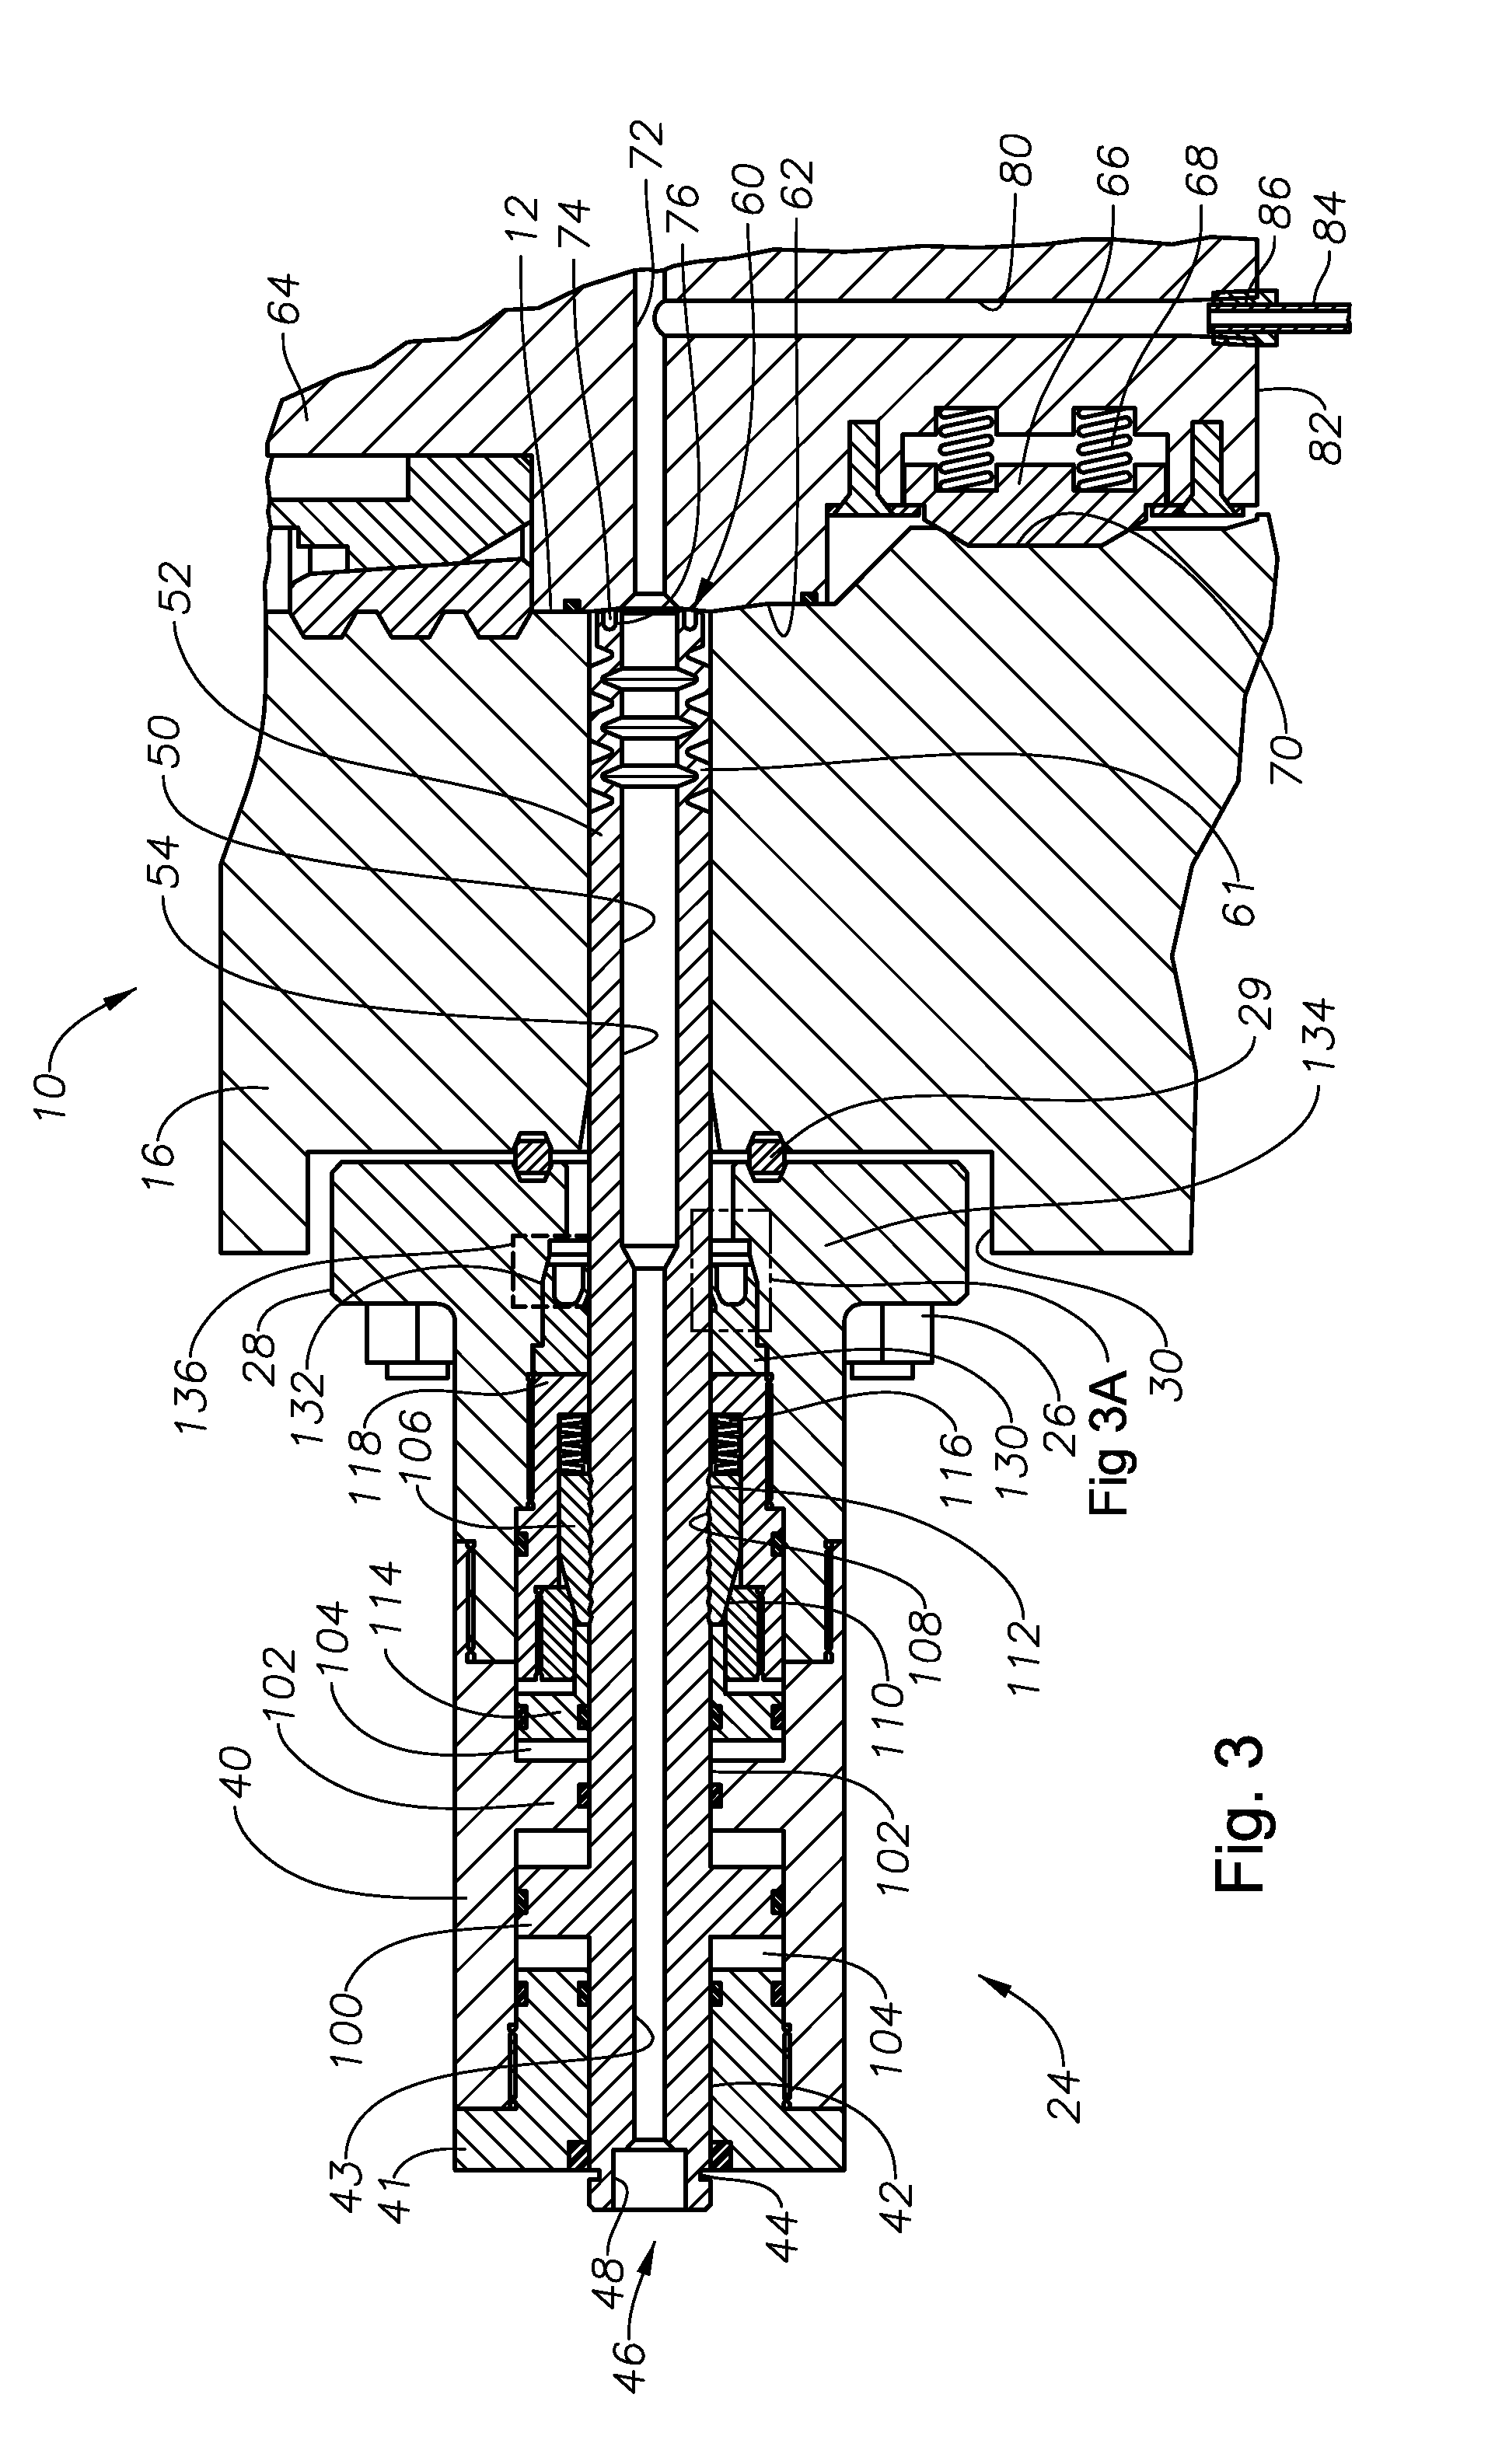 Metal-to-metal sealing arrangement for control line and method of using same